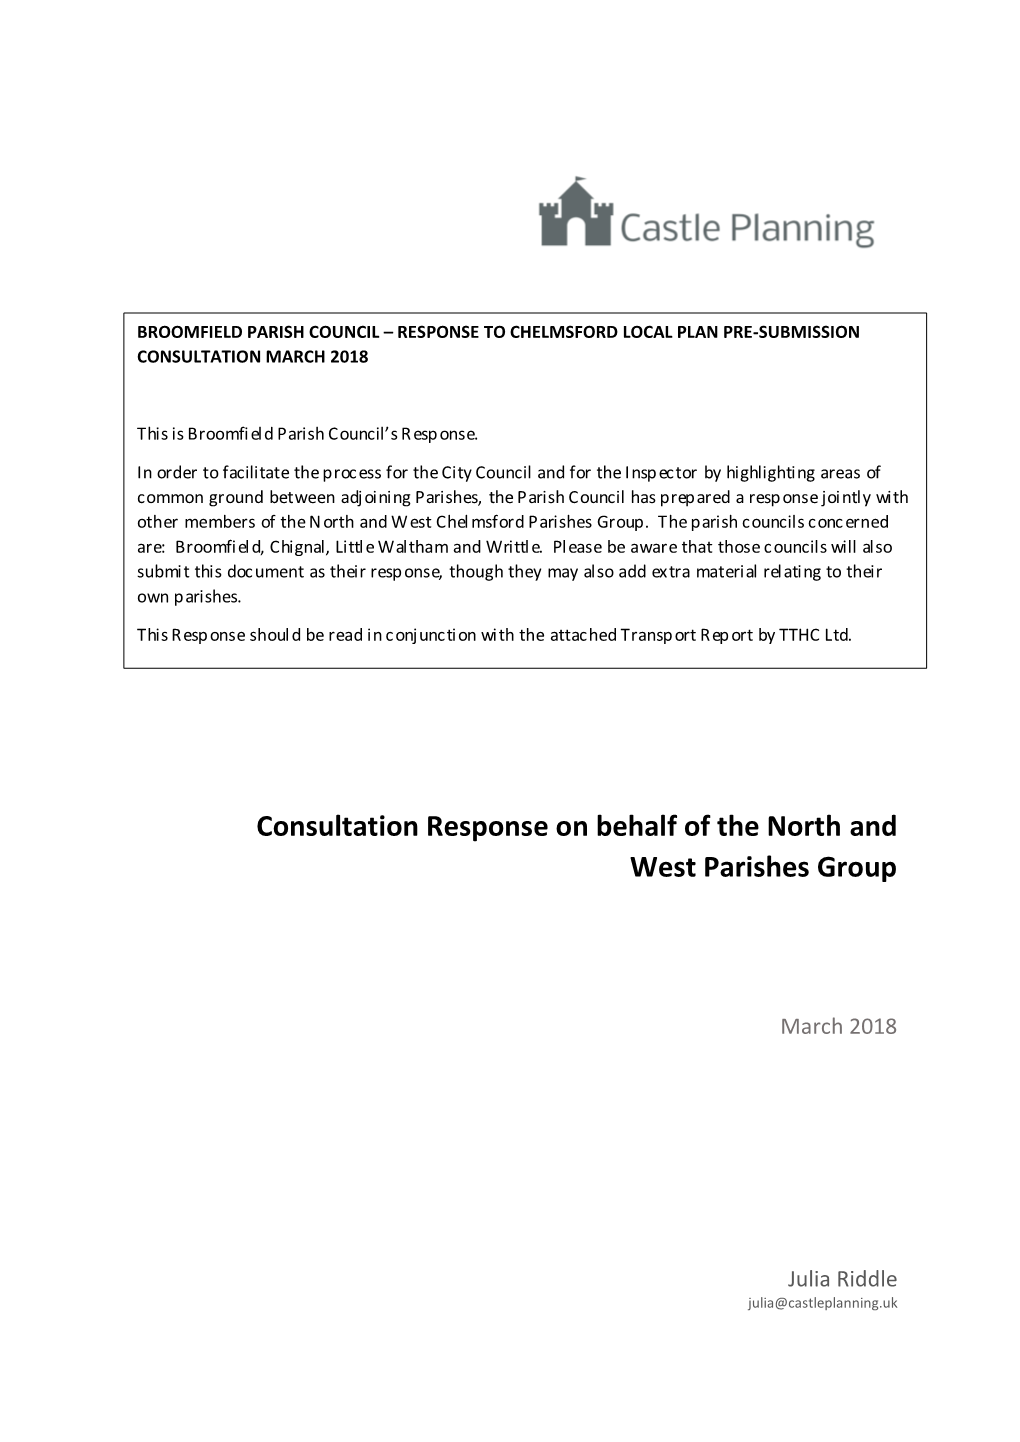 Consultation Response on Behalf of the North and West Parishes Group